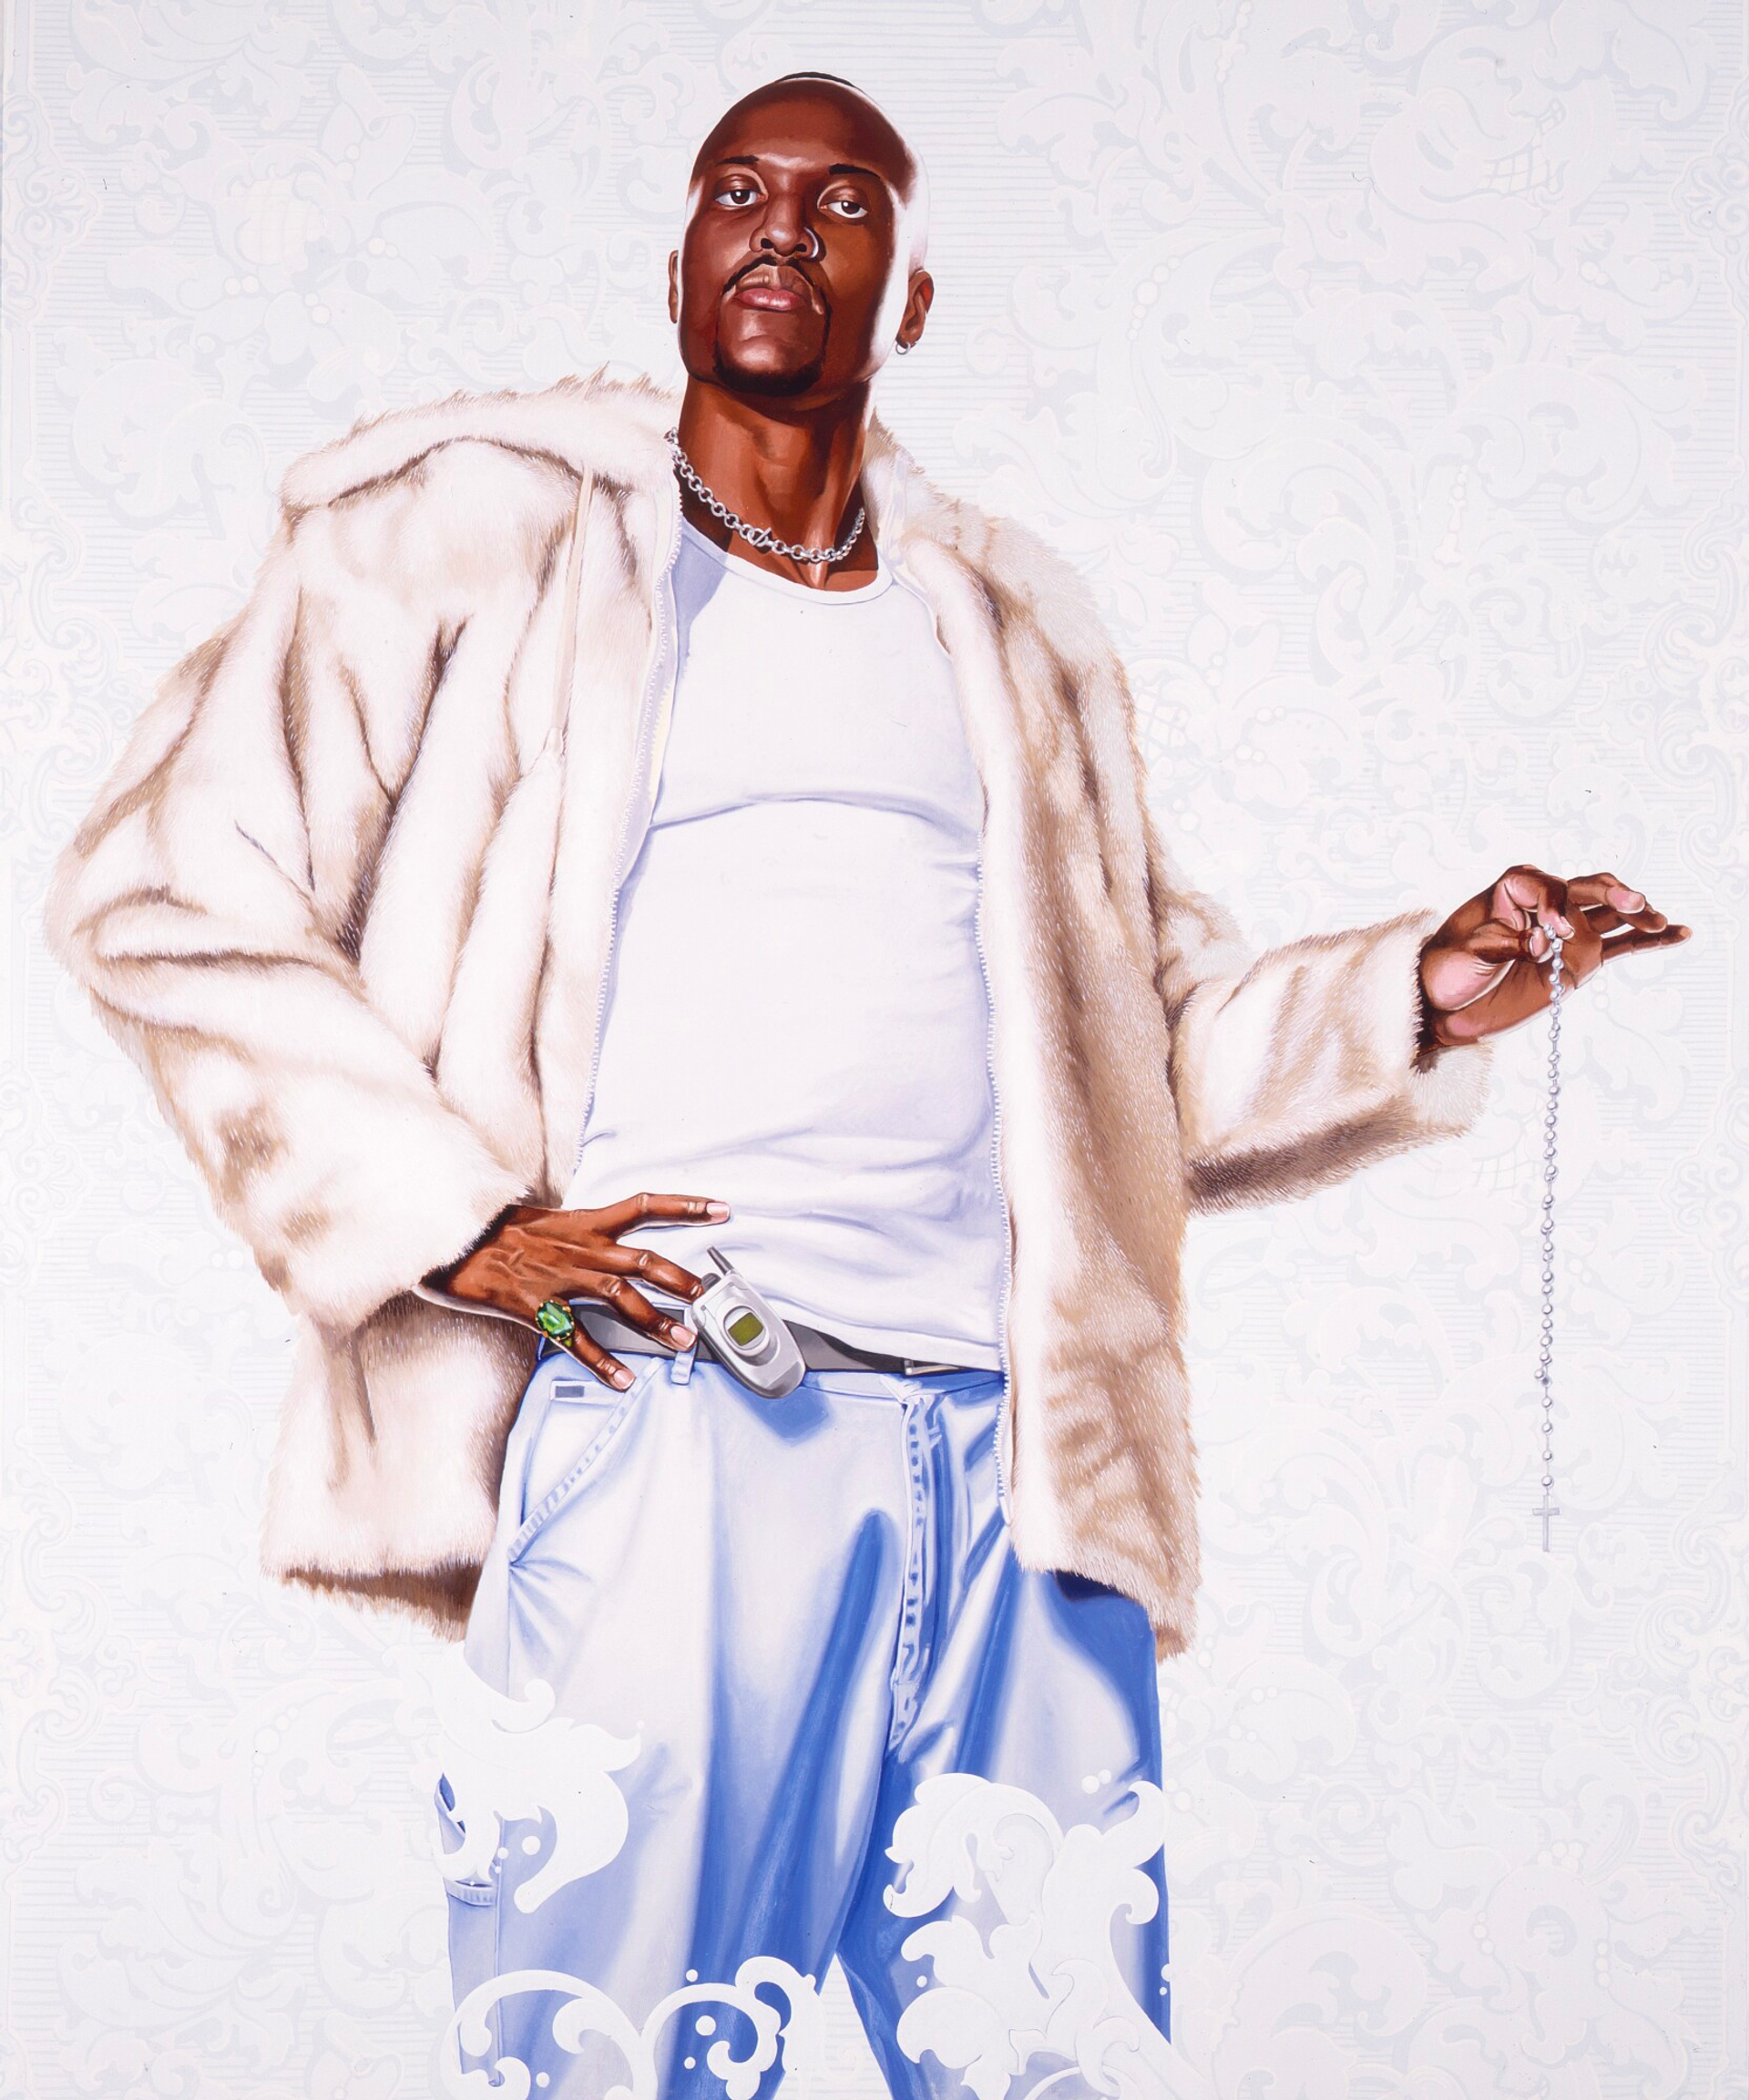 In the portrait, a black man exudes confidence as he gazes directly at the viewer. He is stylishly attired in white trousers, a white shirt, and a white fur jacket. One hand rests on his hip, revealing a visible flip phone attached to it. Around his neck, he wears a chain, and he holds another chain between two fingers, allowing it to dangle gracefully.